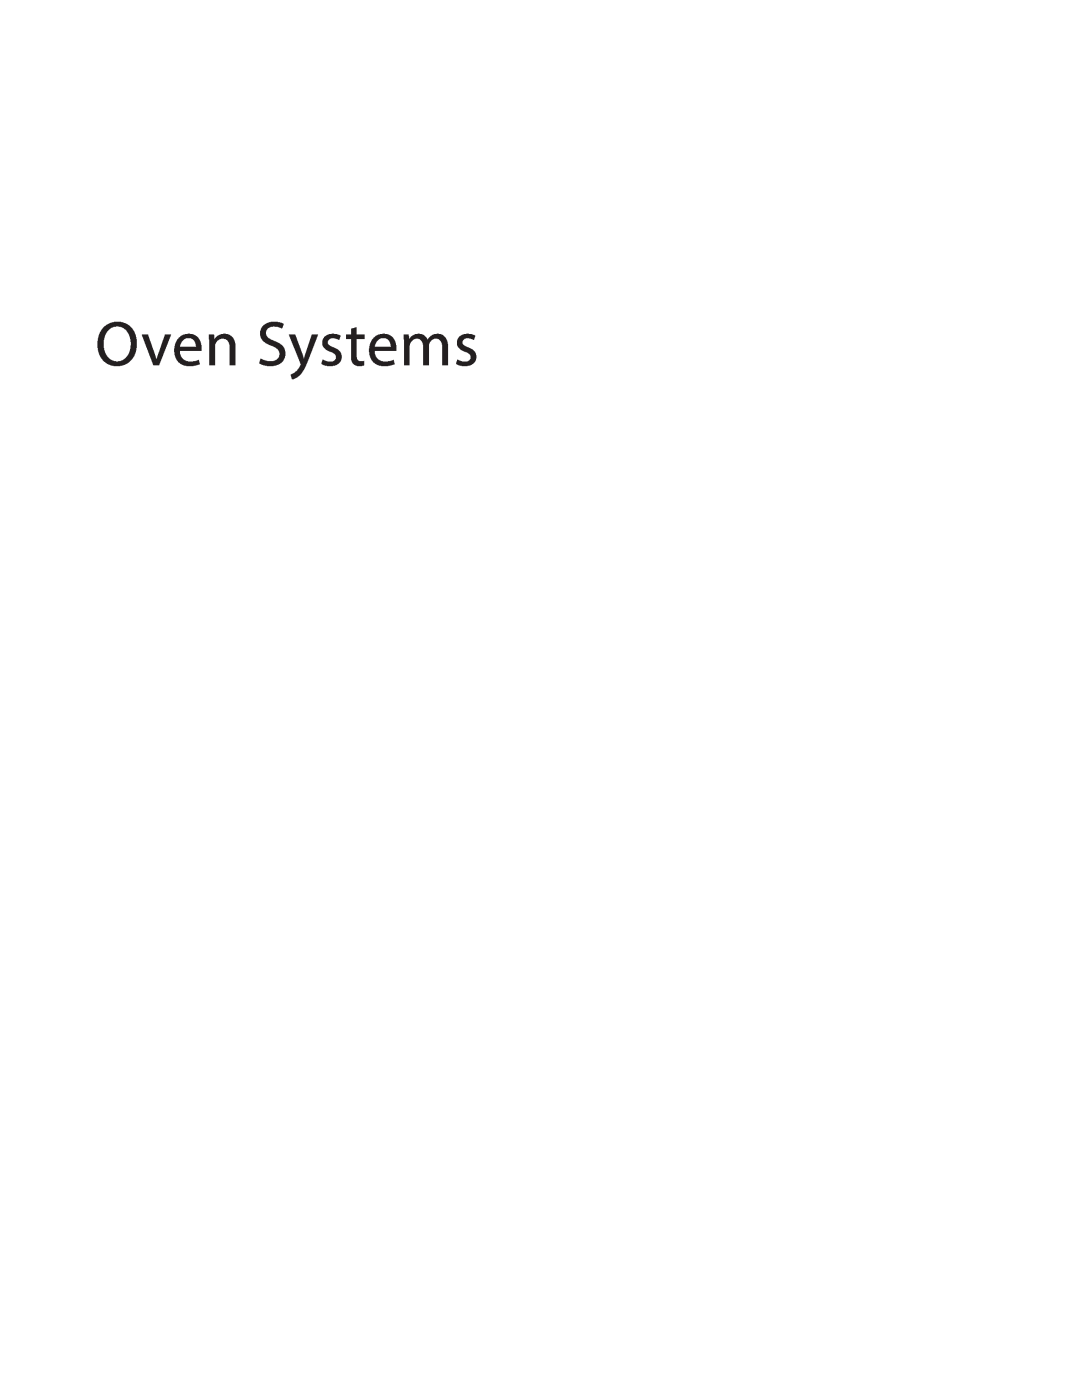 Turbo Chef Technologies i5 service manual Oven Systems 